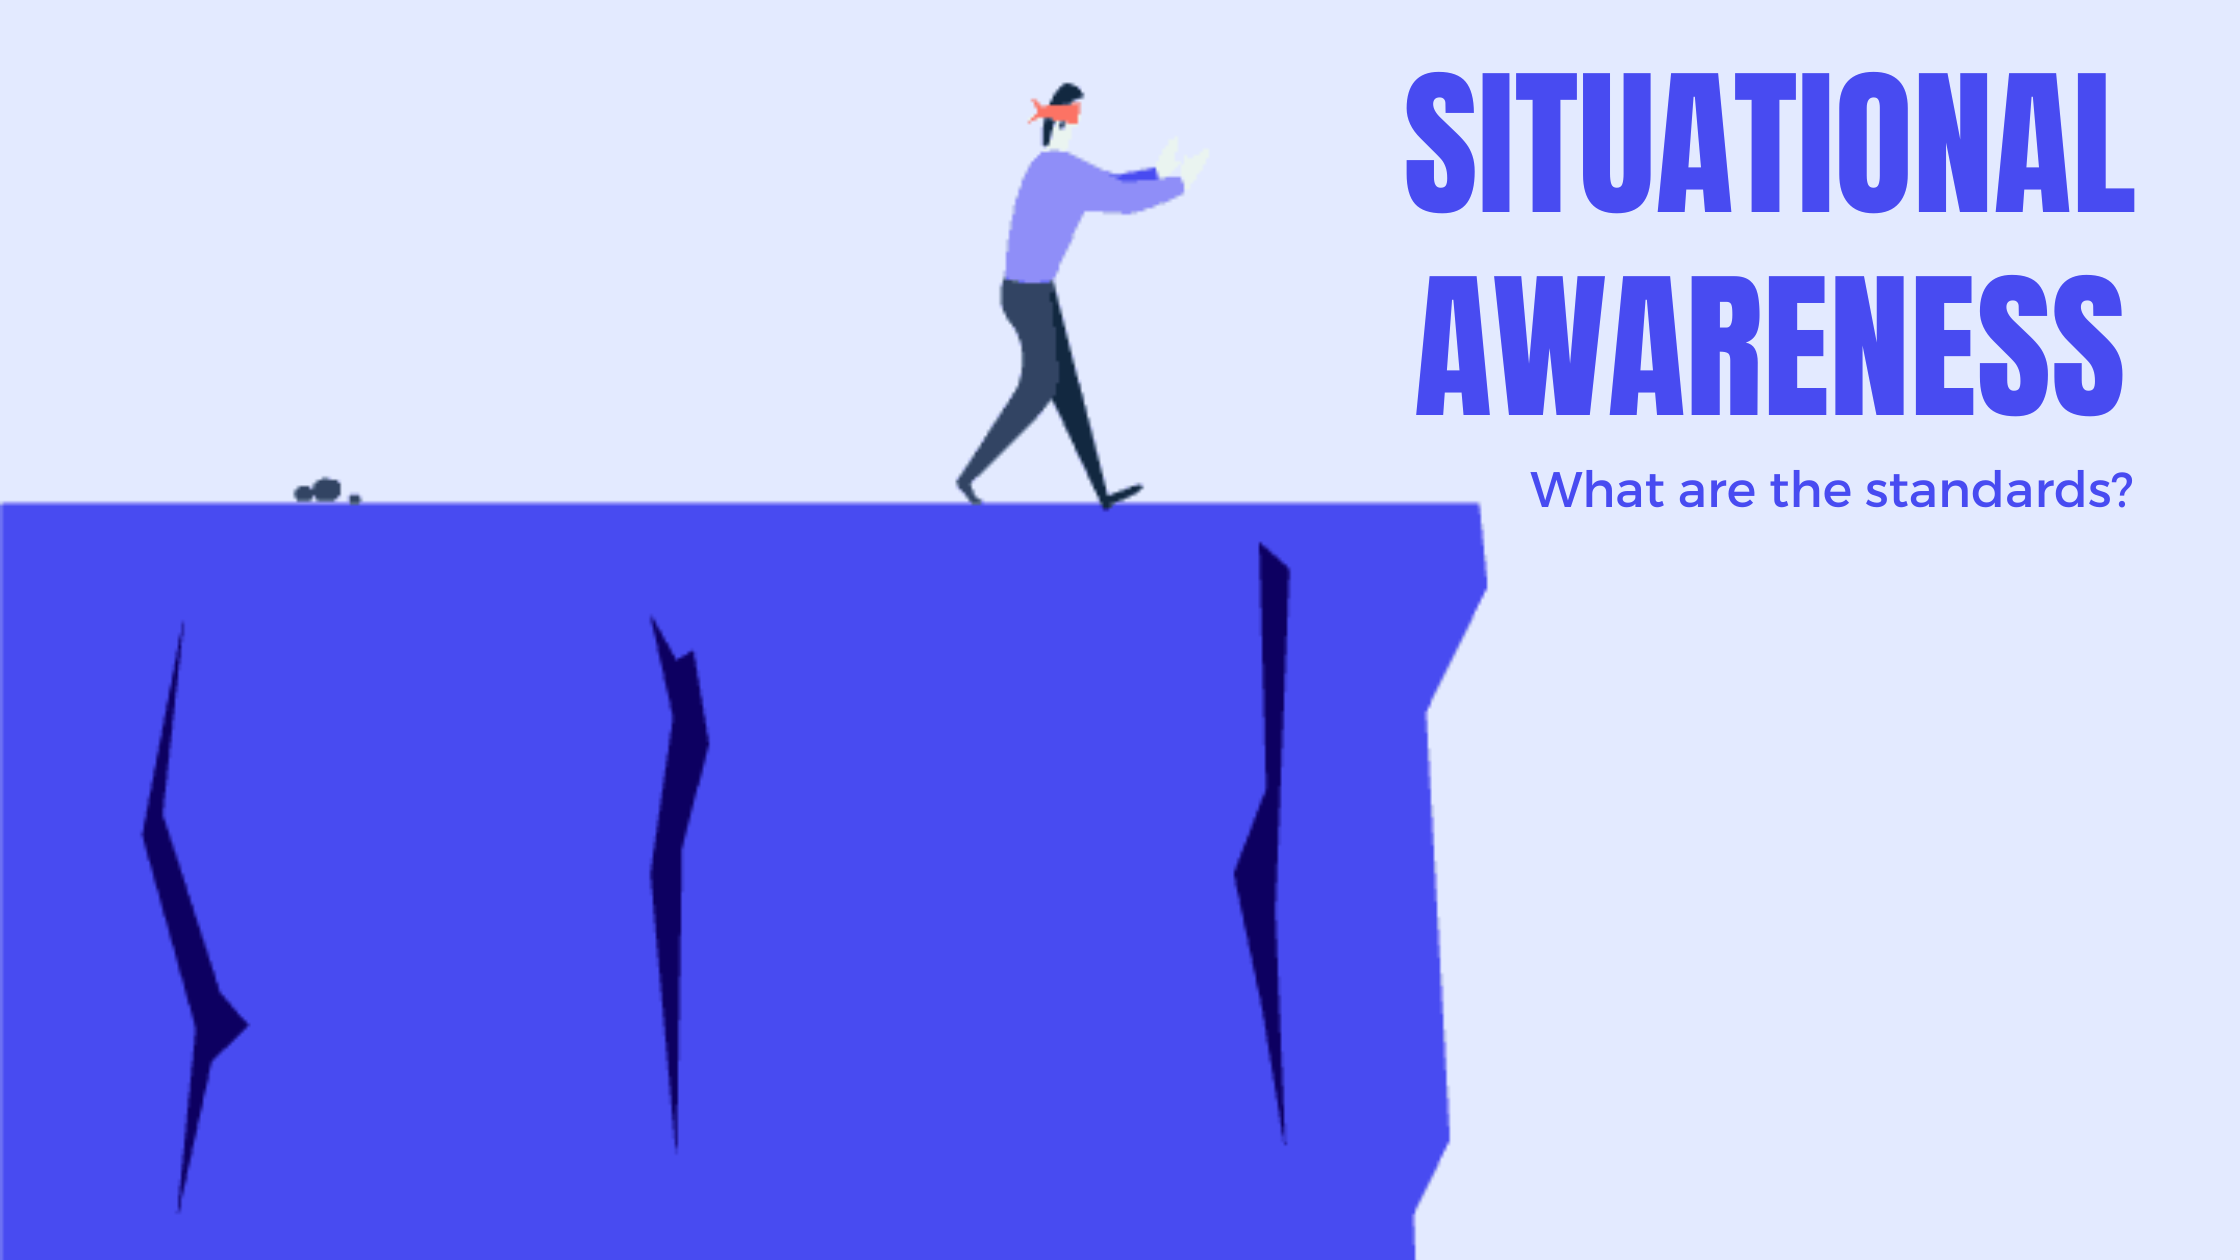 Why are there No Standards for Situational Awareness?